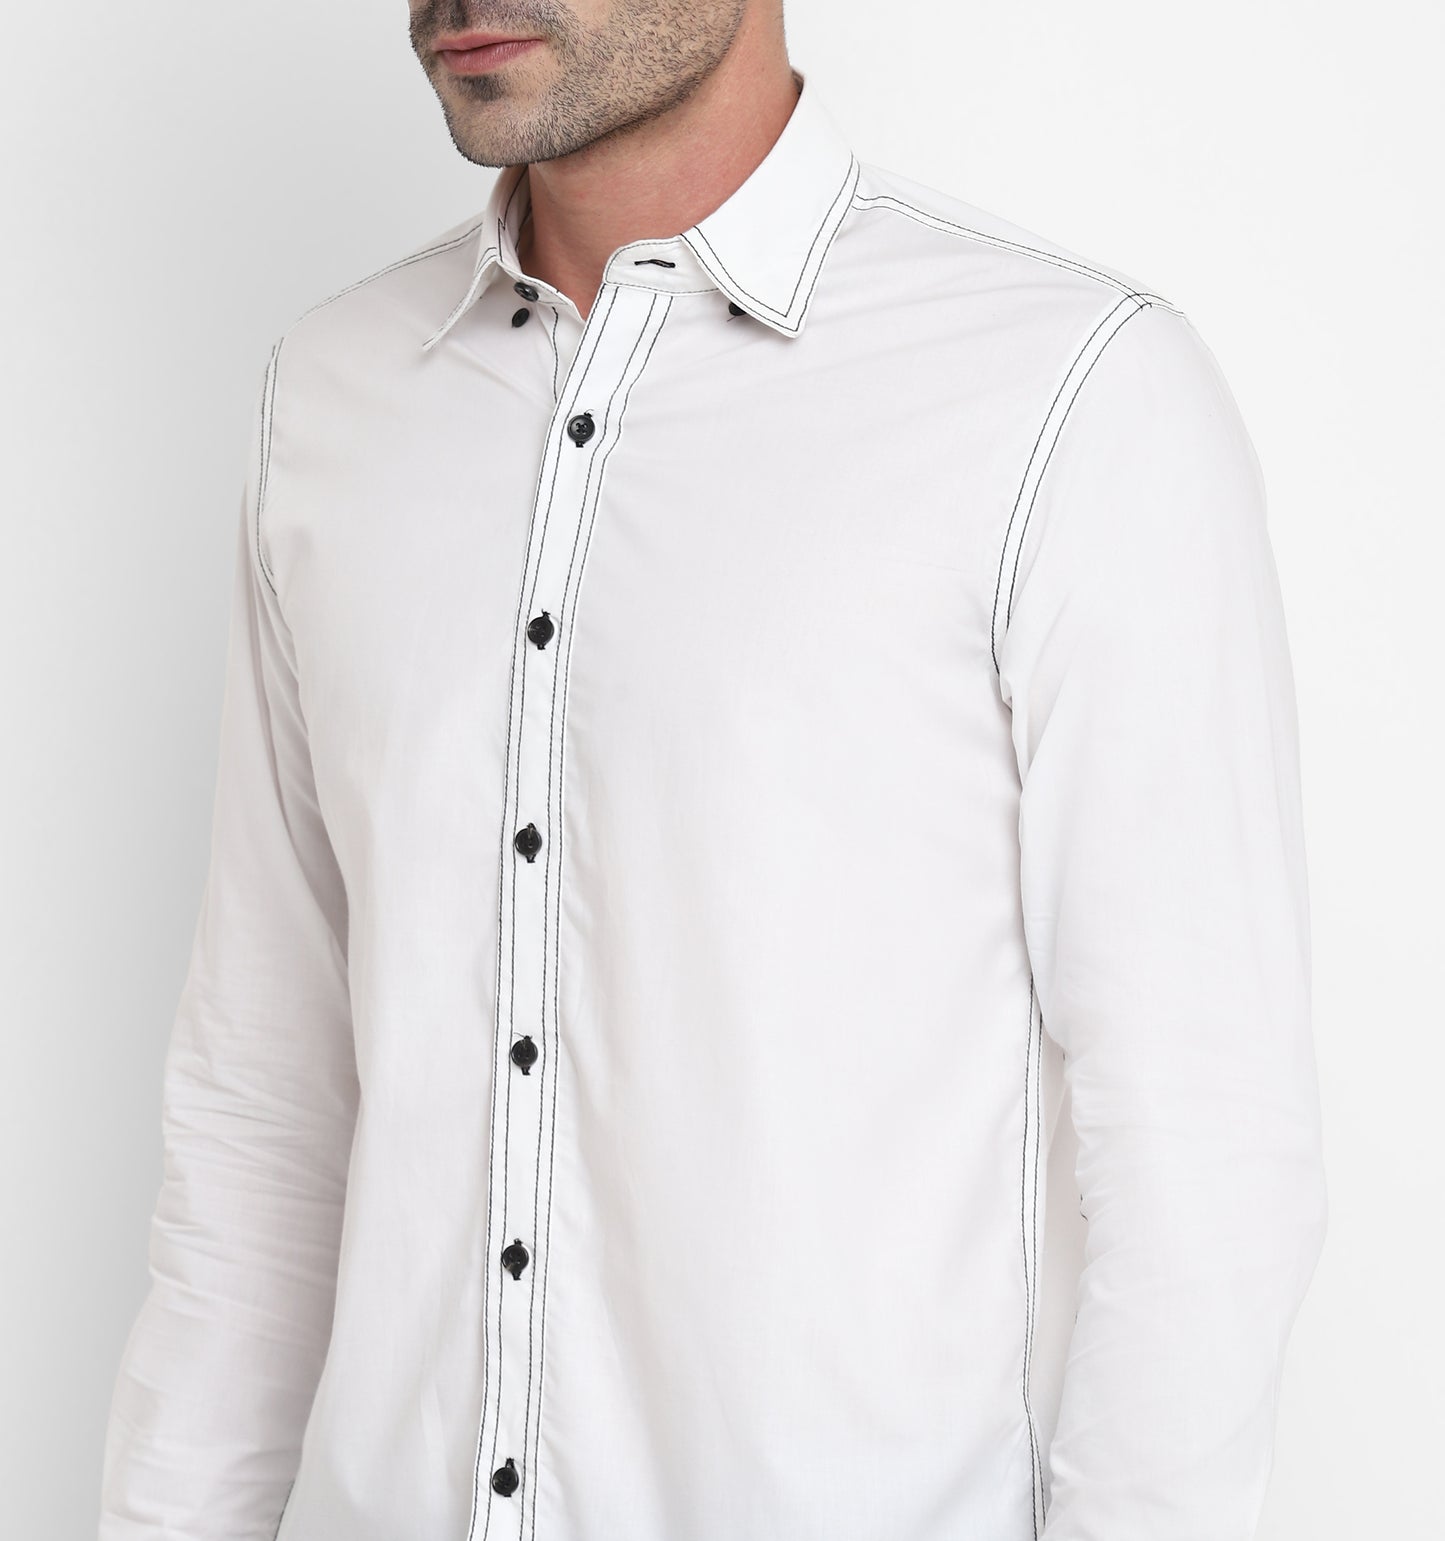 Outlines shirt white